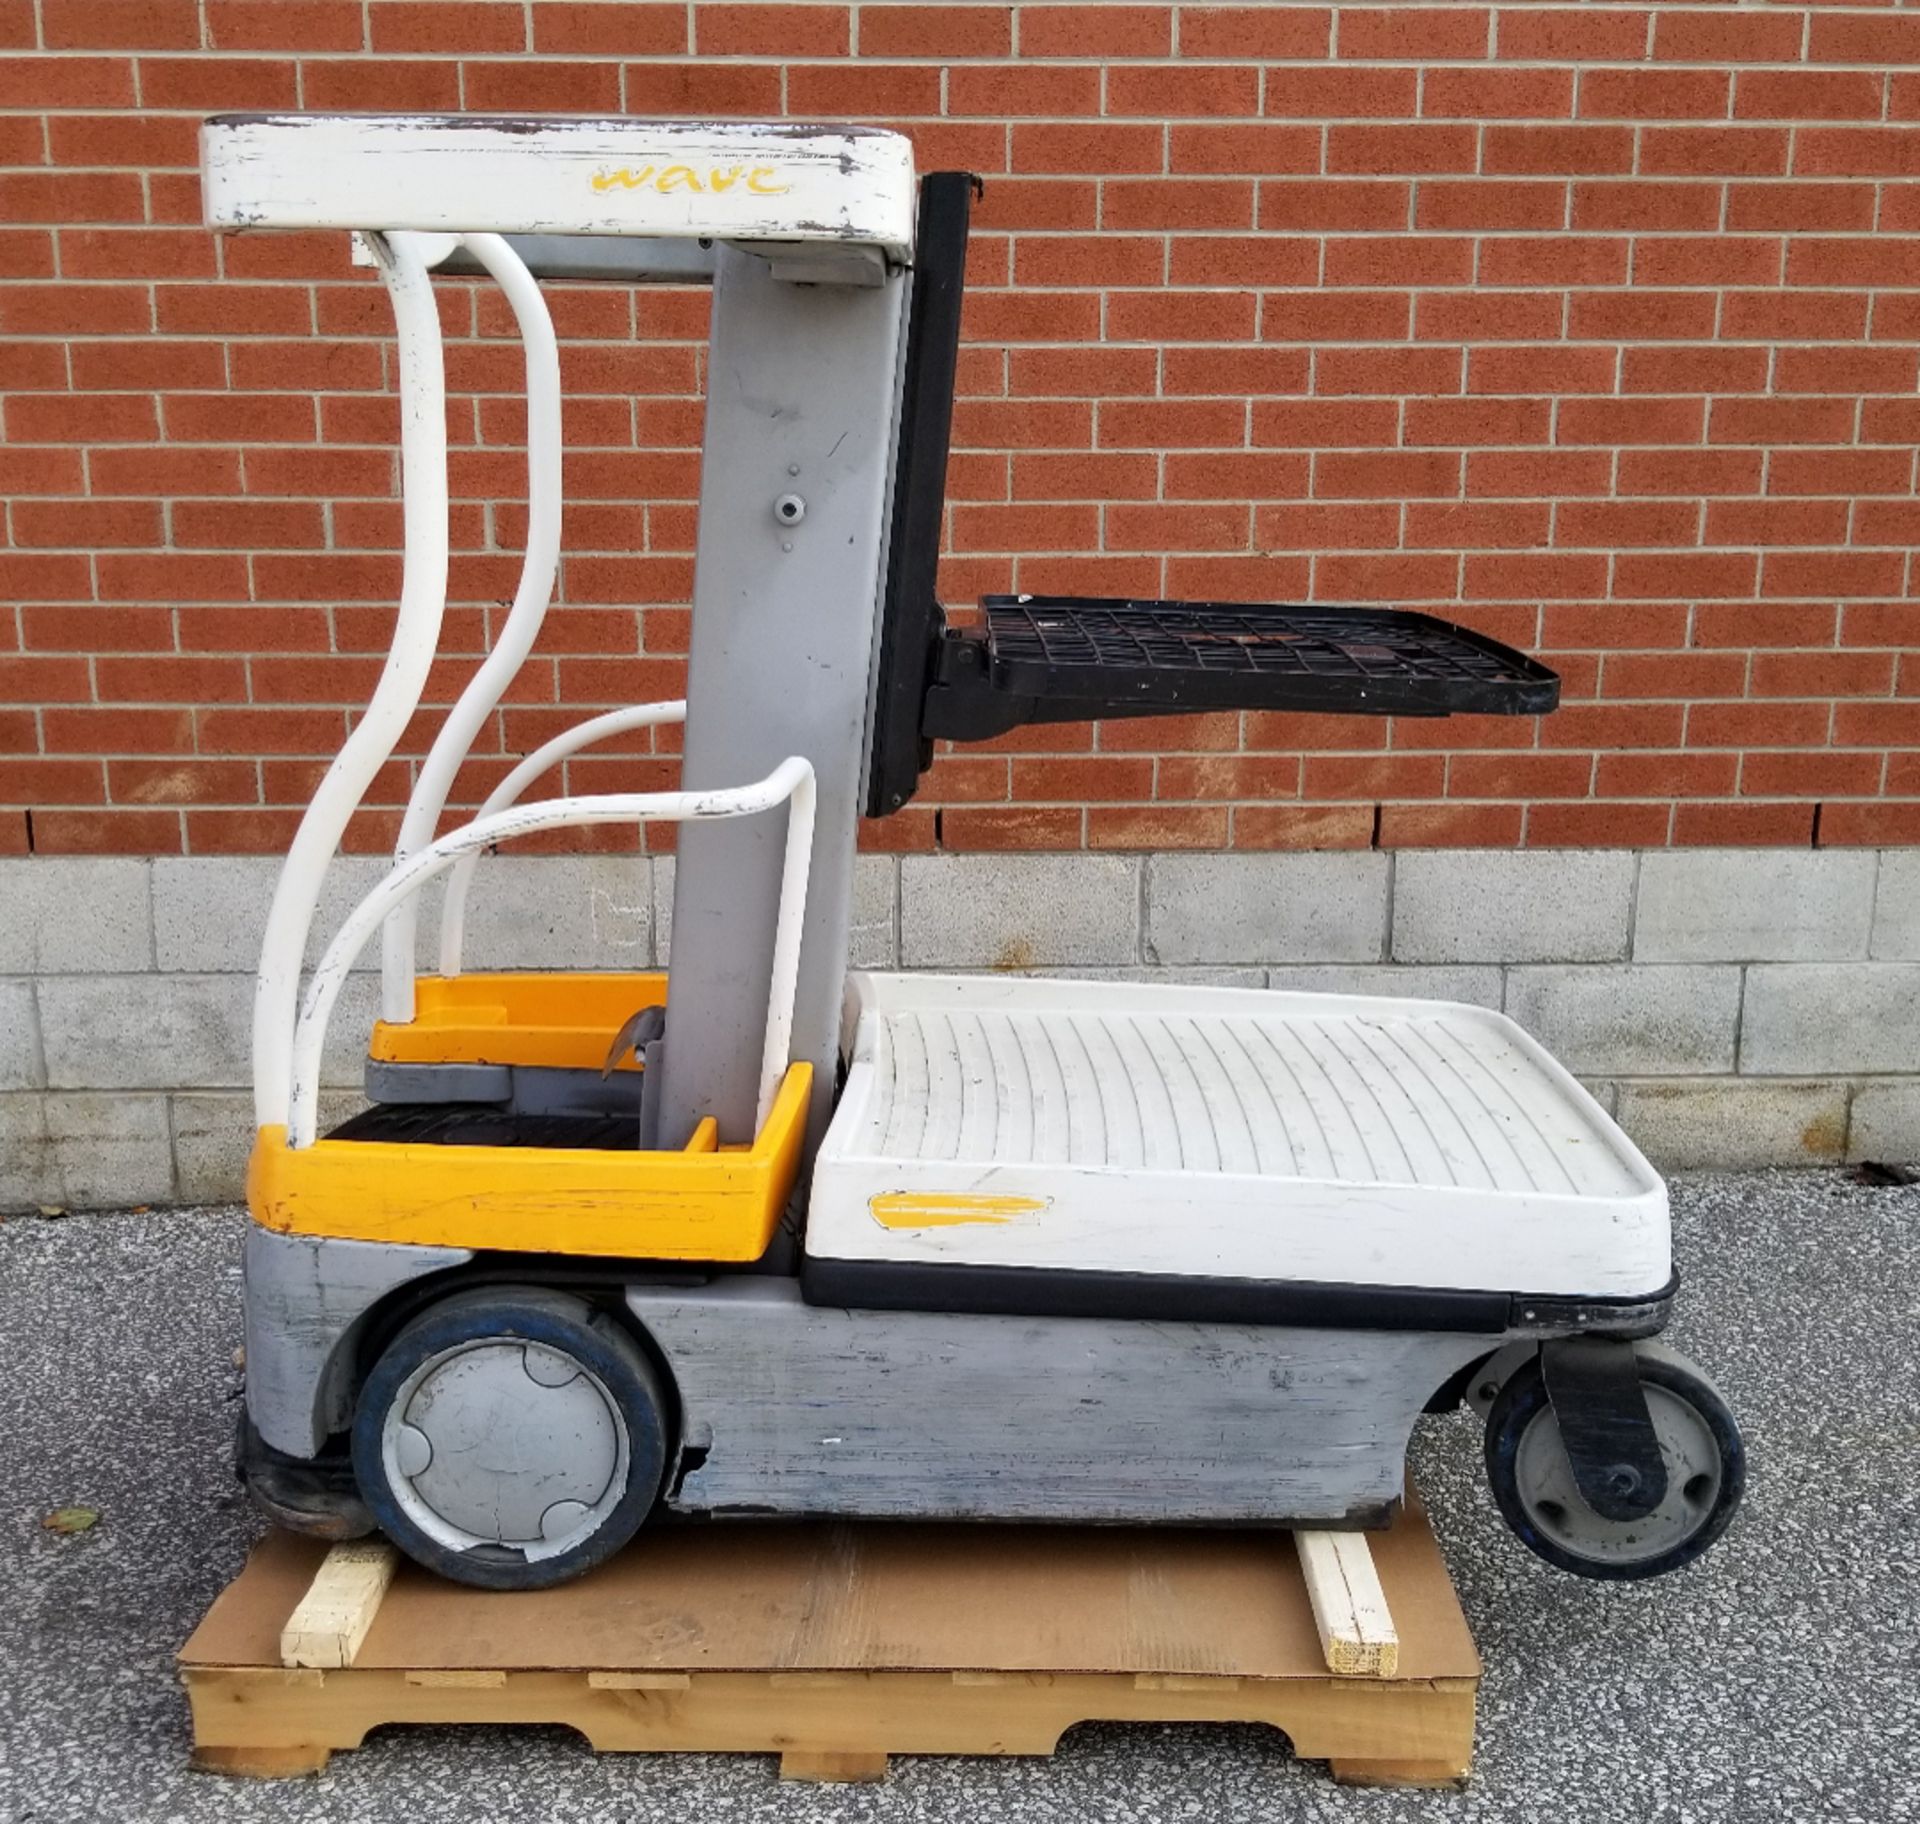 CROWN (2009) WAV50-118 24V ELECTRIC ORDER PICKER WITH 500 LB. CAPACITY, 118" VERTICAL LIFT, BUILT-IN